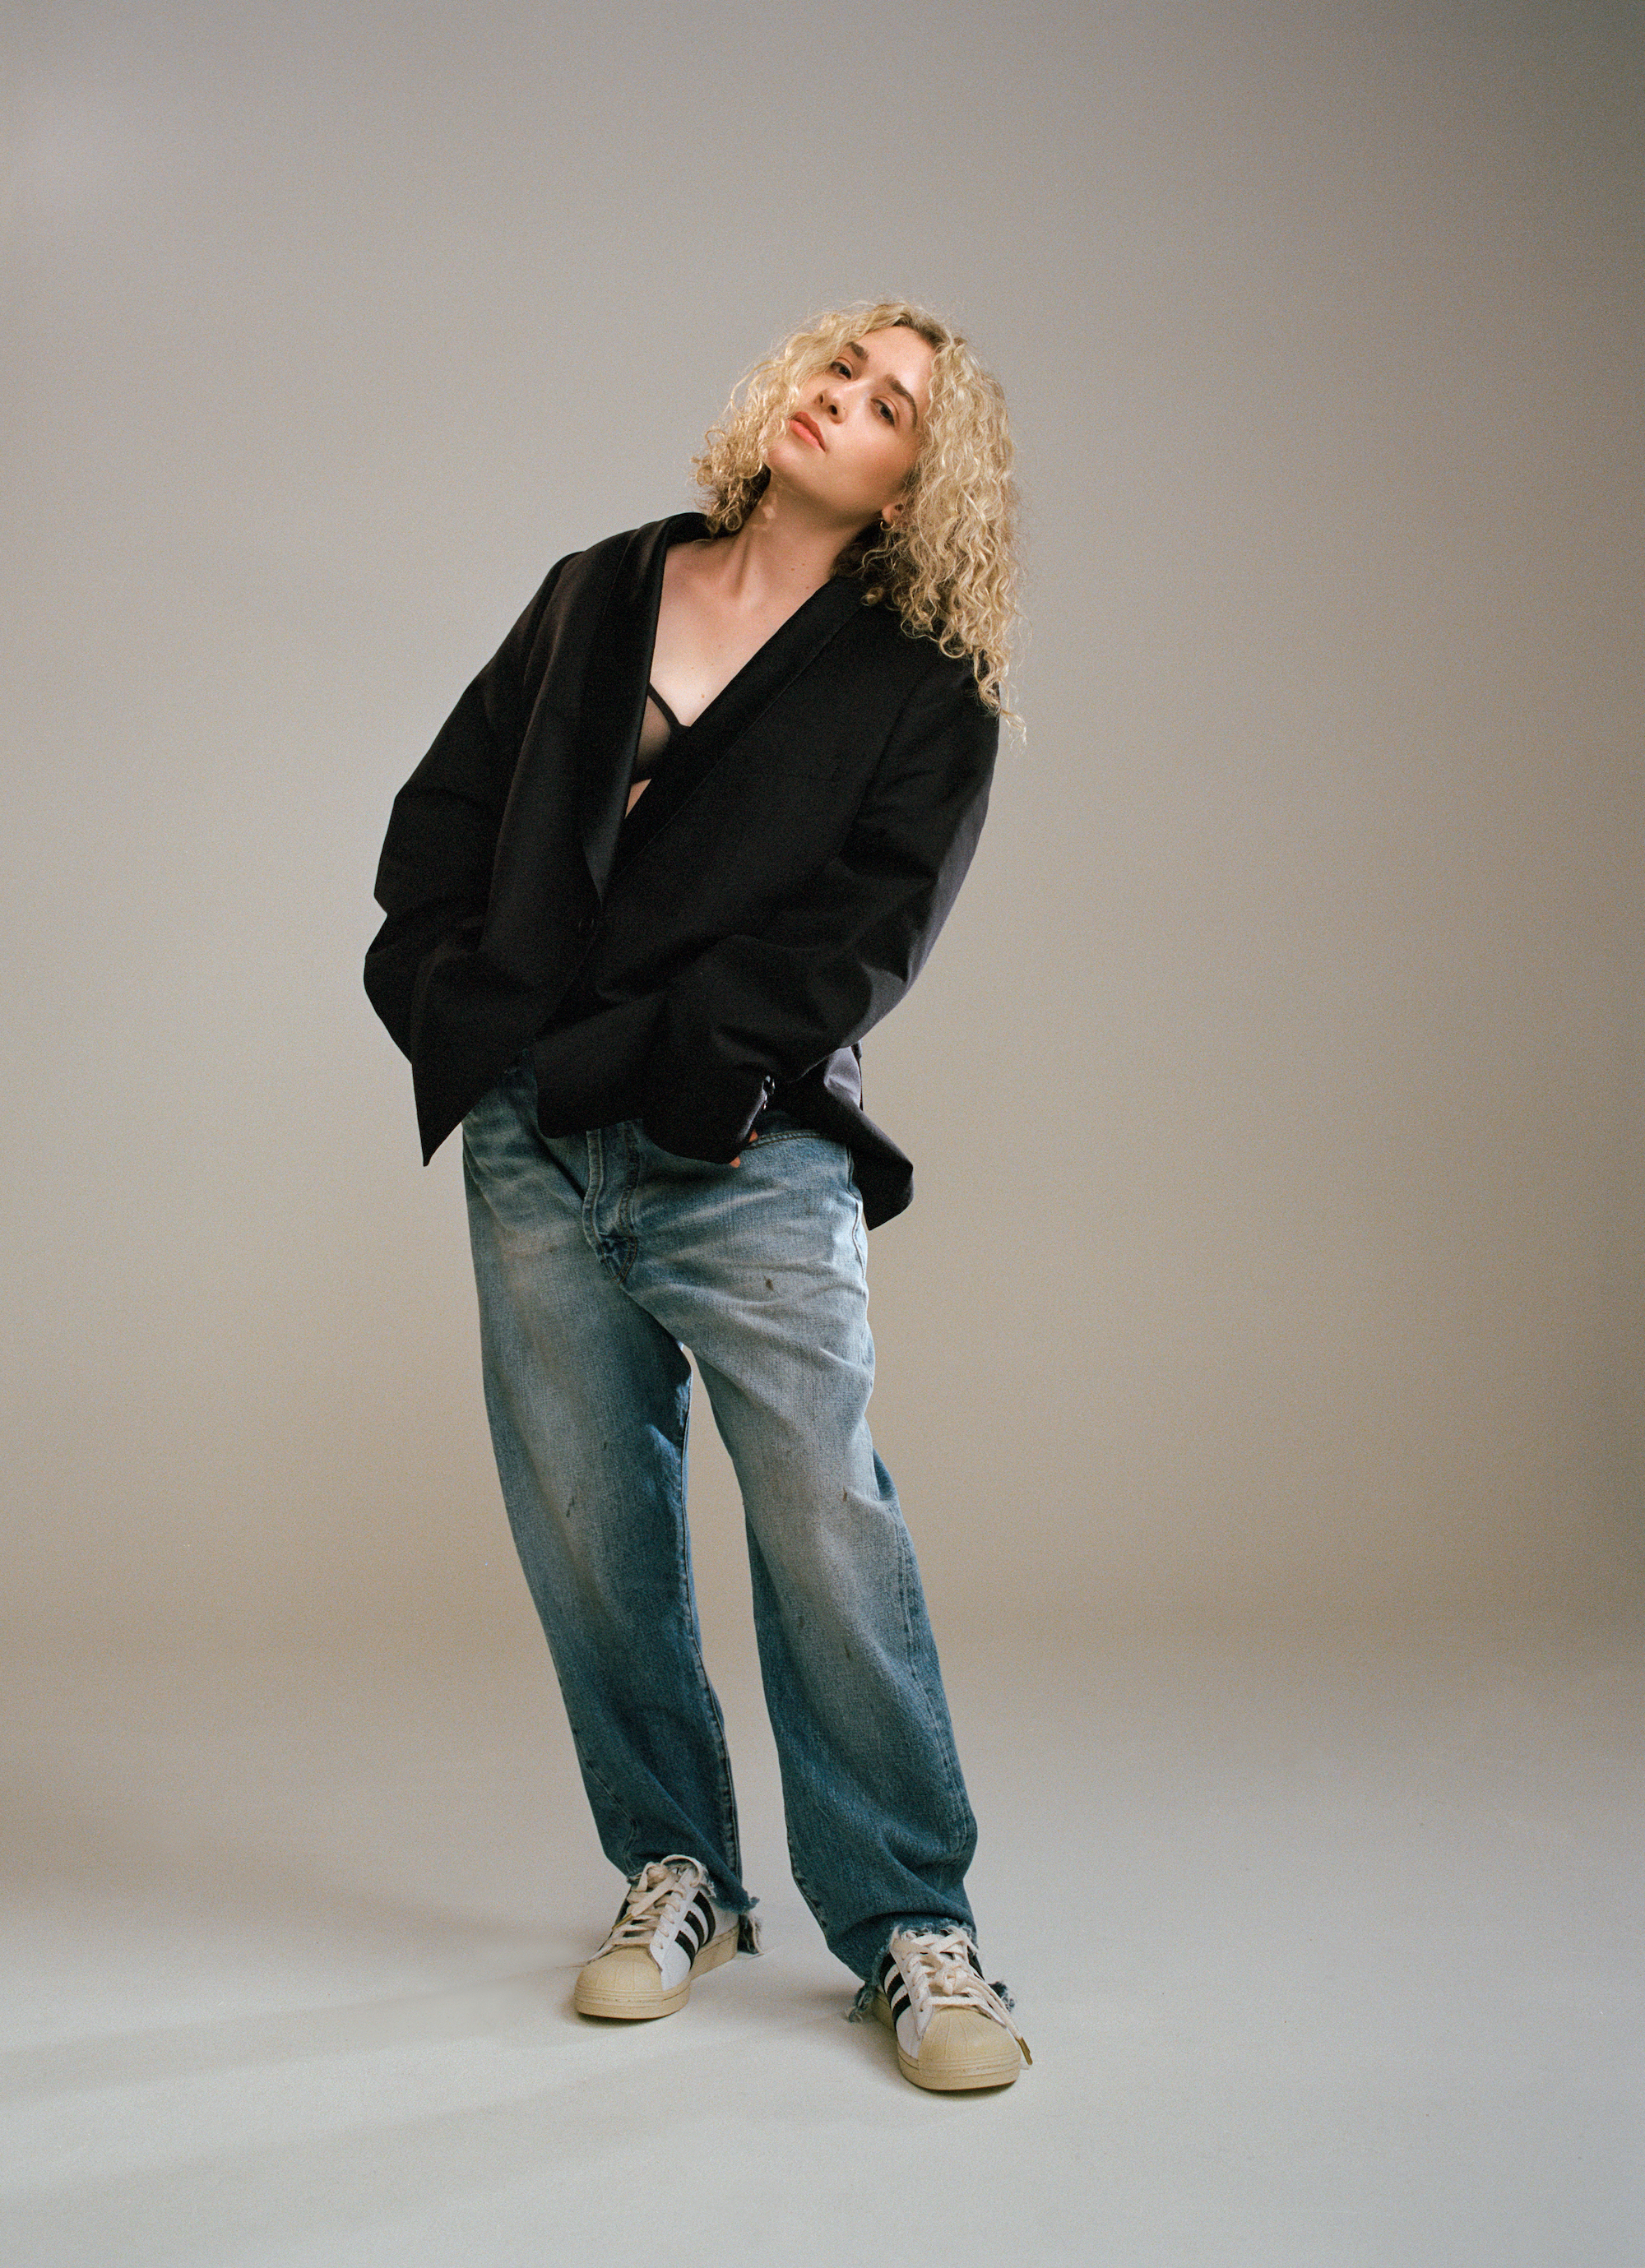 blondshell wearing blue jeans and an open blazer with her head tilted to the side